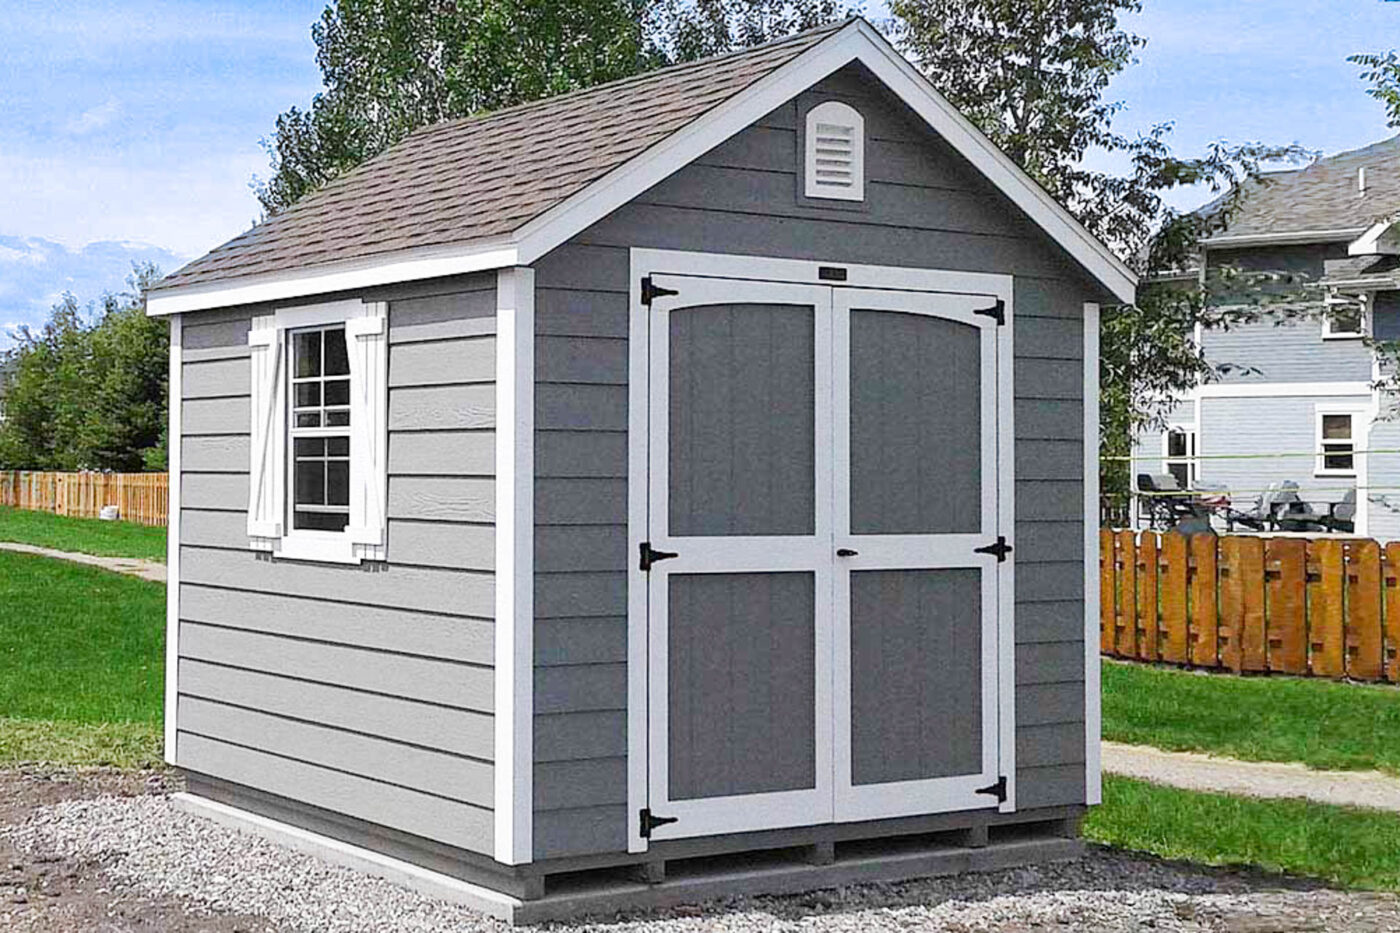 Sheds for sale in MT, WY, UT